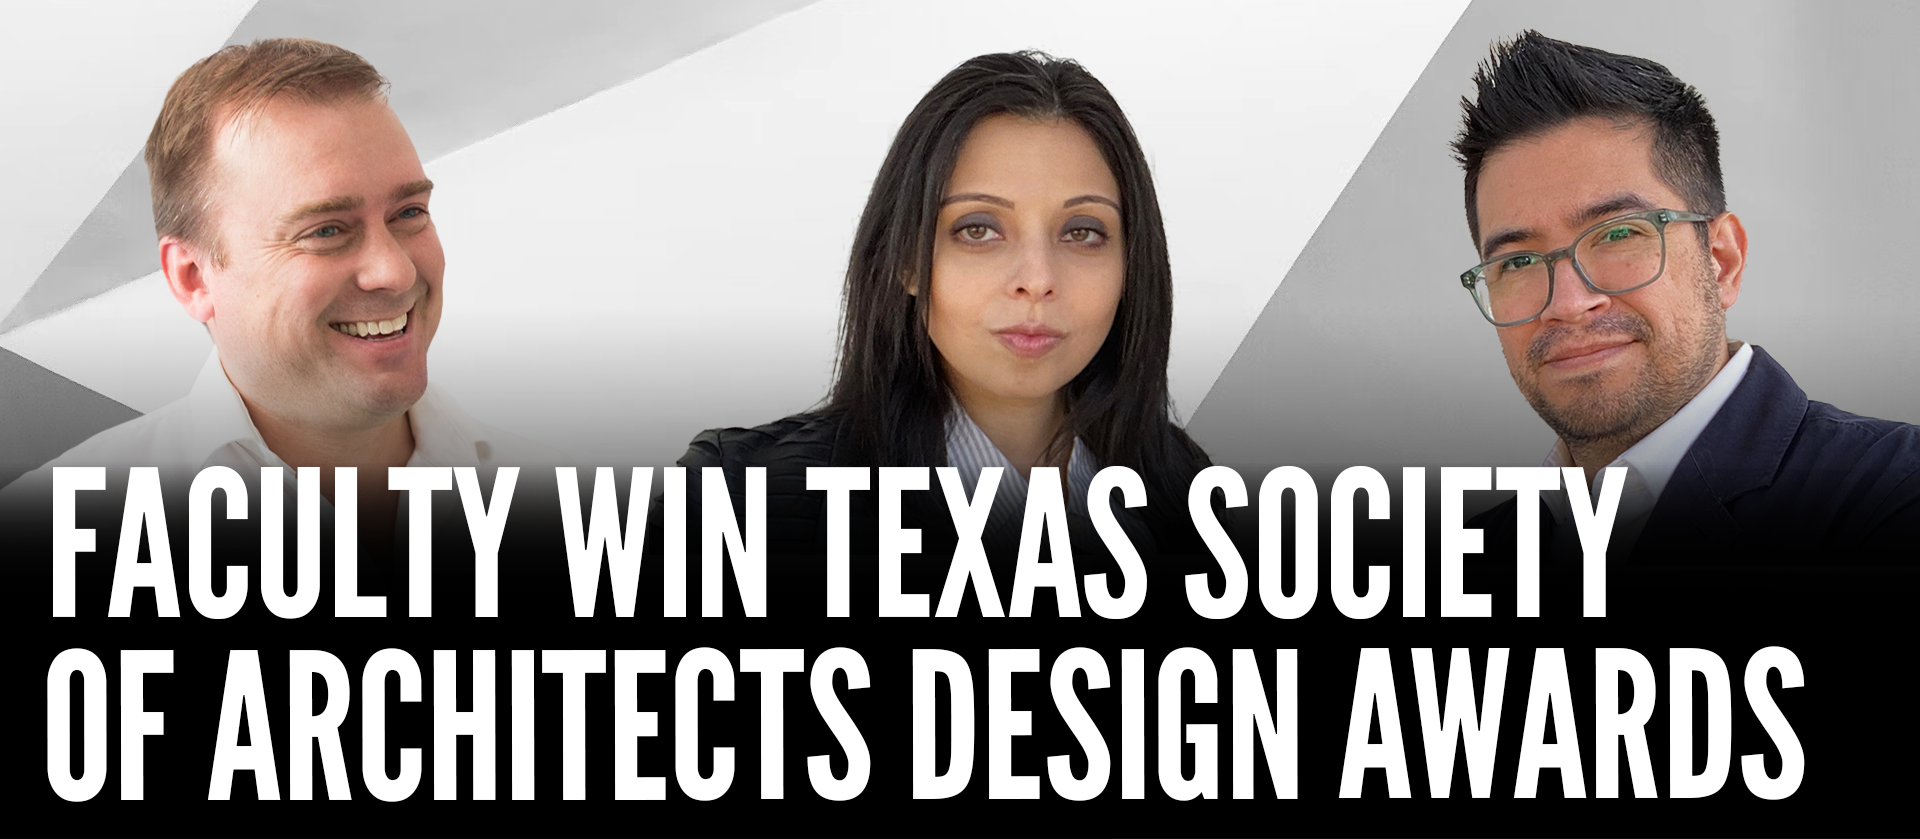 Architecture Faculty Win Texas Society of Architects Design Awards